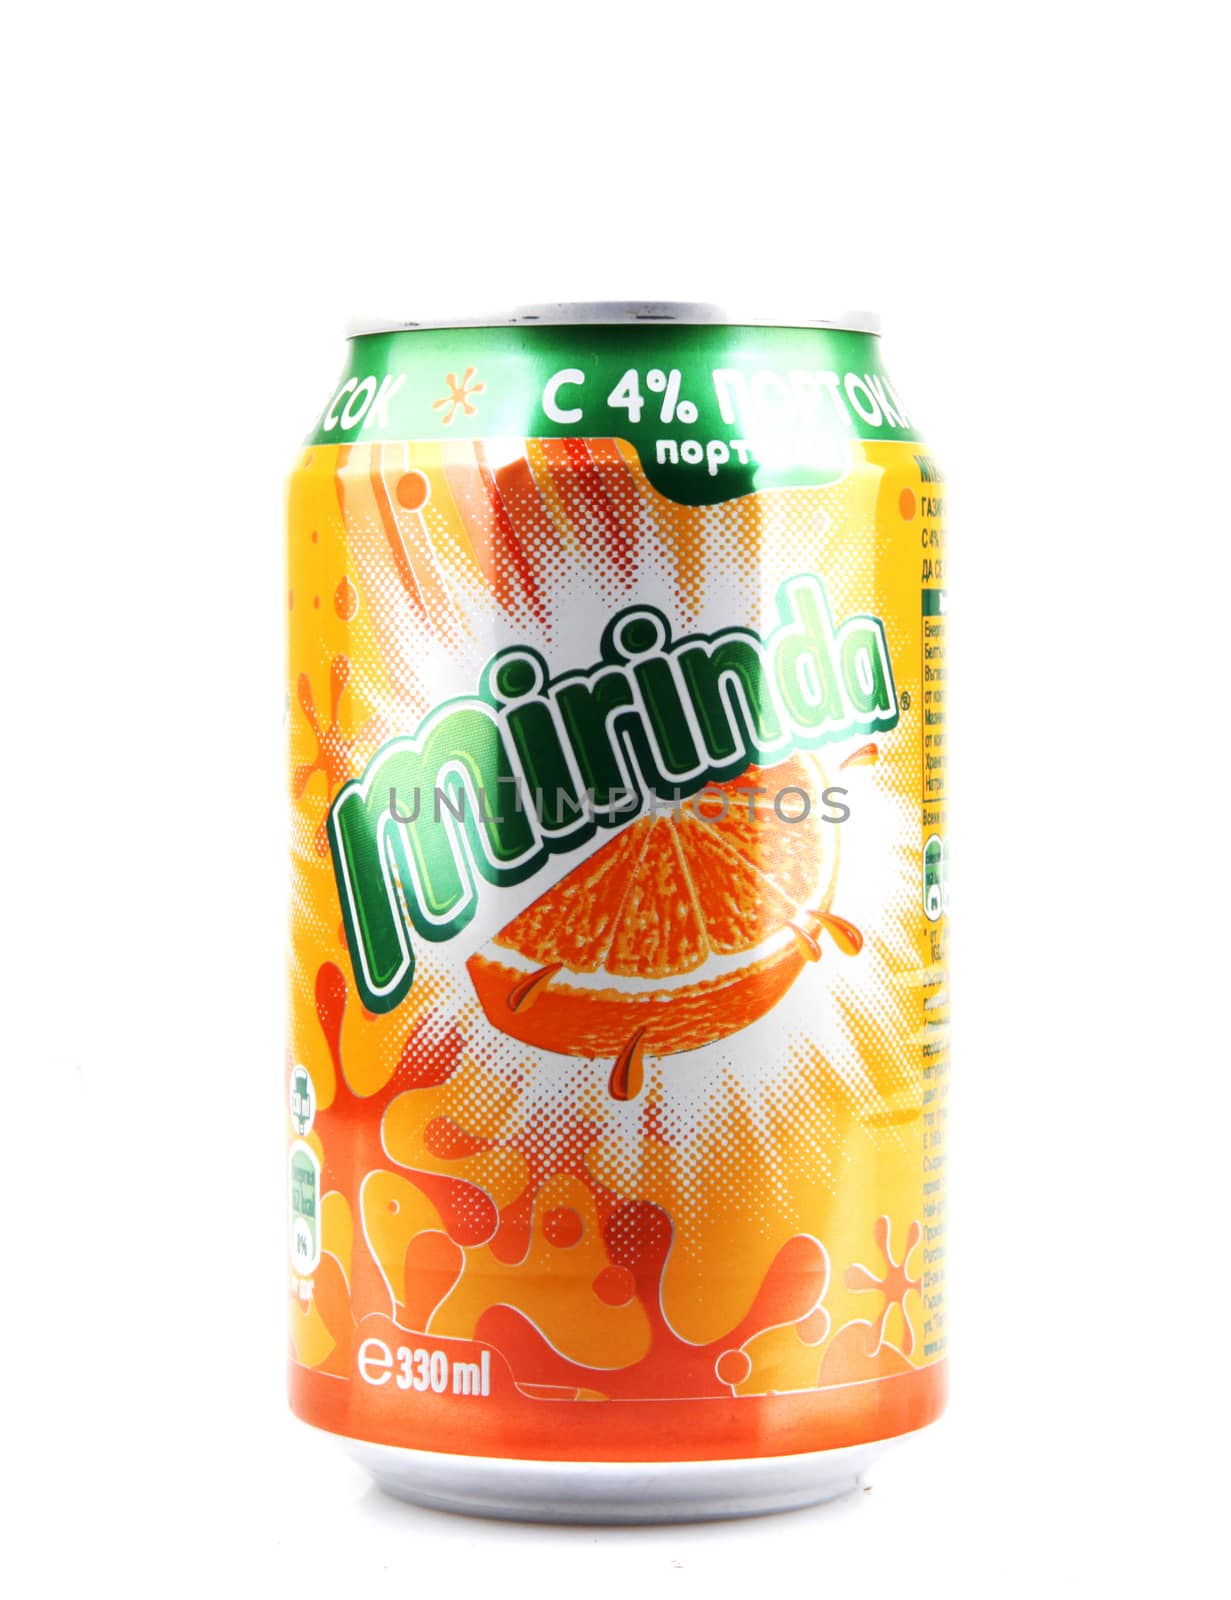 AYTOS, BULGARIA - APRIL 03, 2016: Mirinda isolated on white background. Mirinda is a brand of soft drink originally created in Spain in 1959, with global distribution.